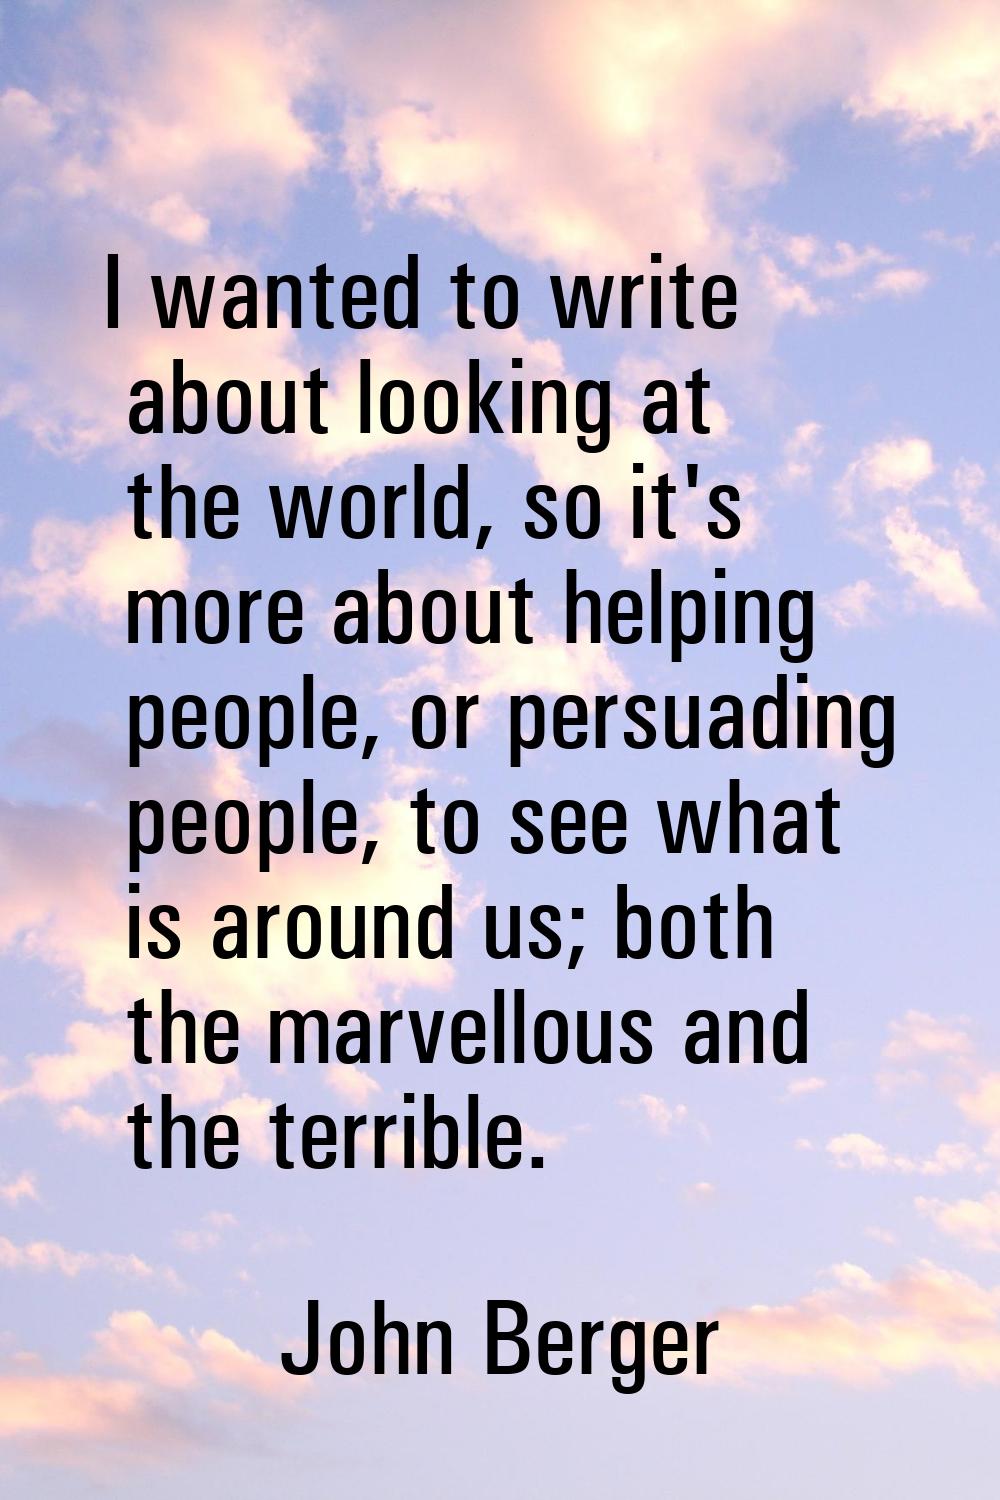 I wanted to write about looking at the world, so it's more about helping people, or persuading peop